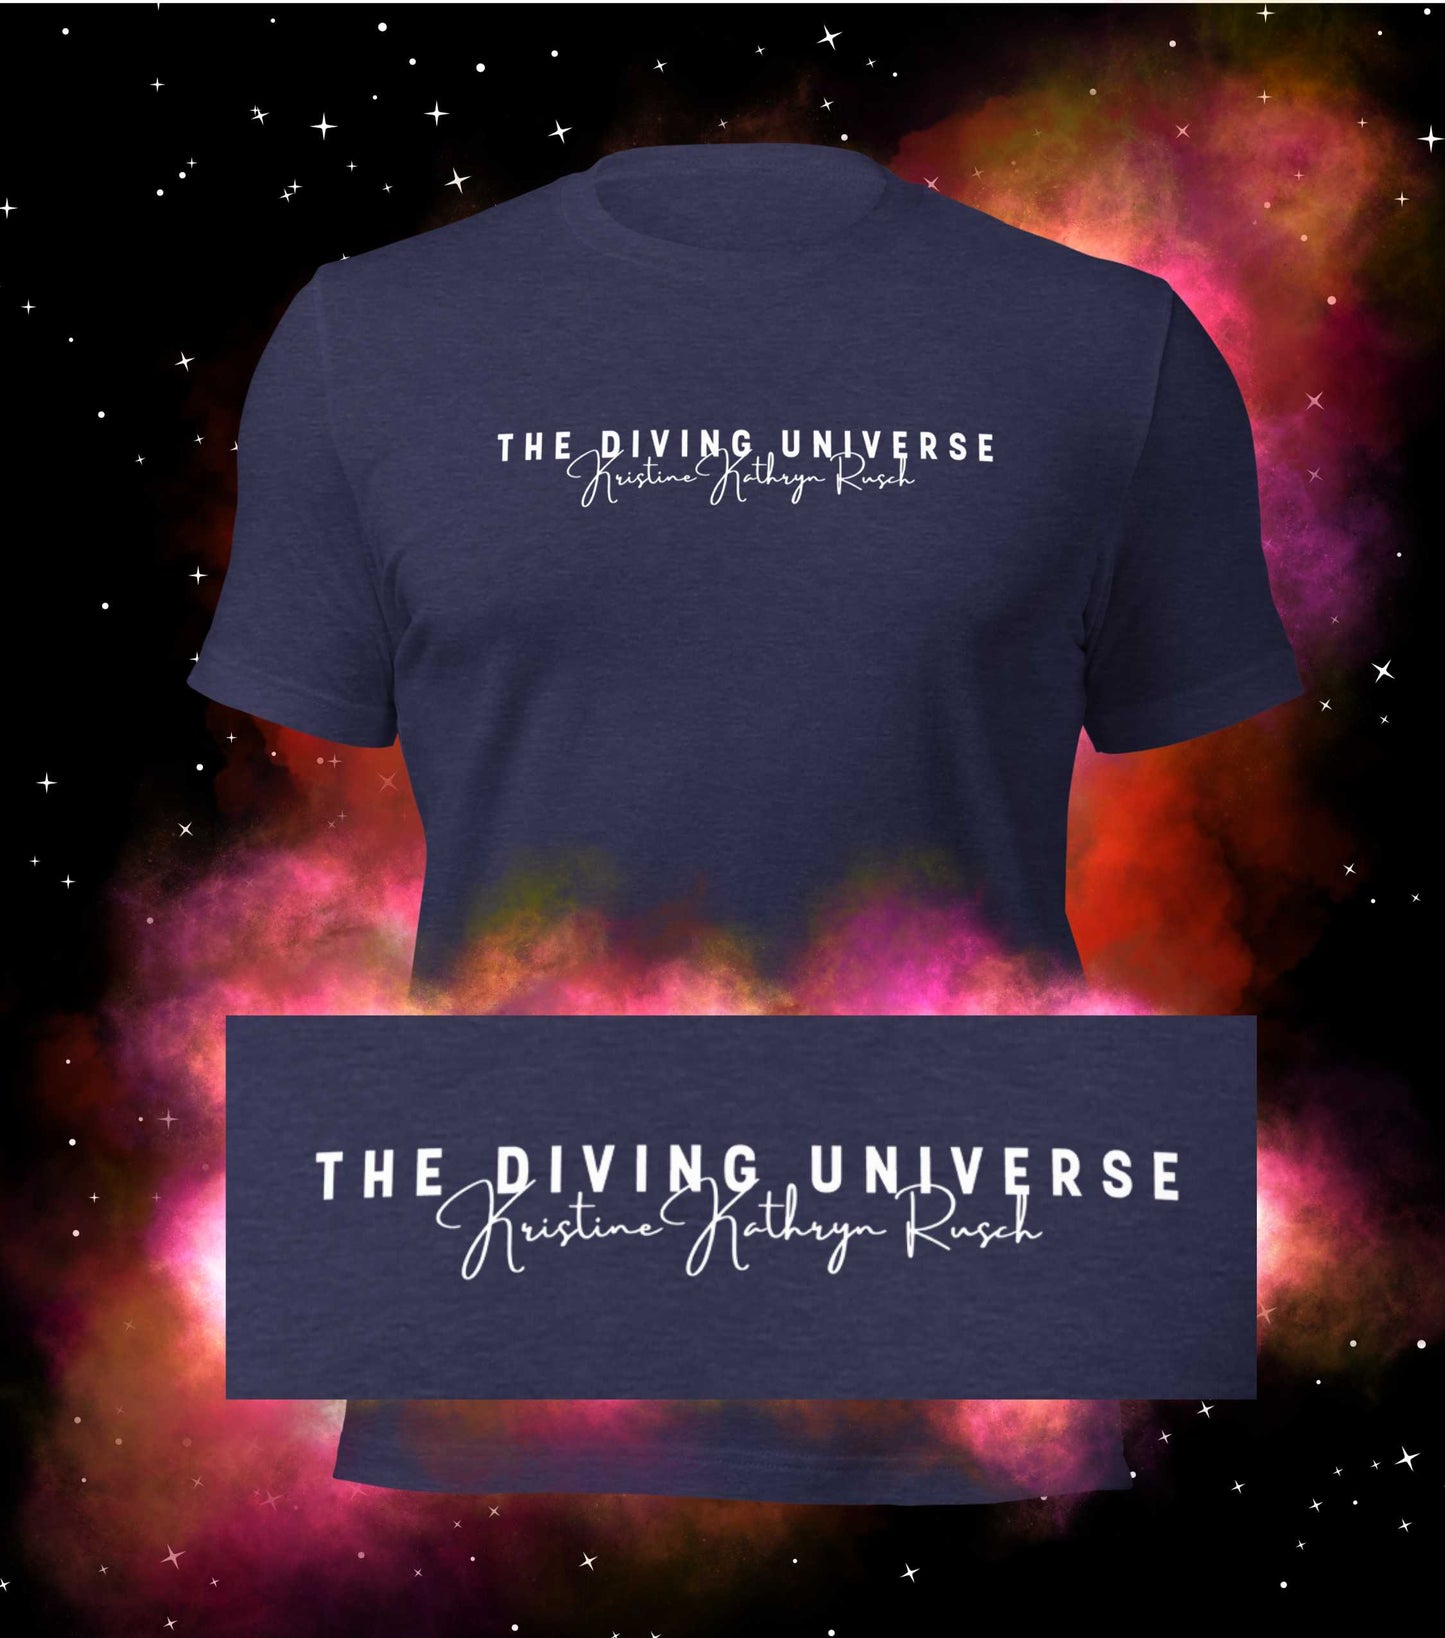 Diving Universe LOGO T-Shirt - The Diving Universe (SPACE OPERA Book Series) by Kristine Kathryn Rusch